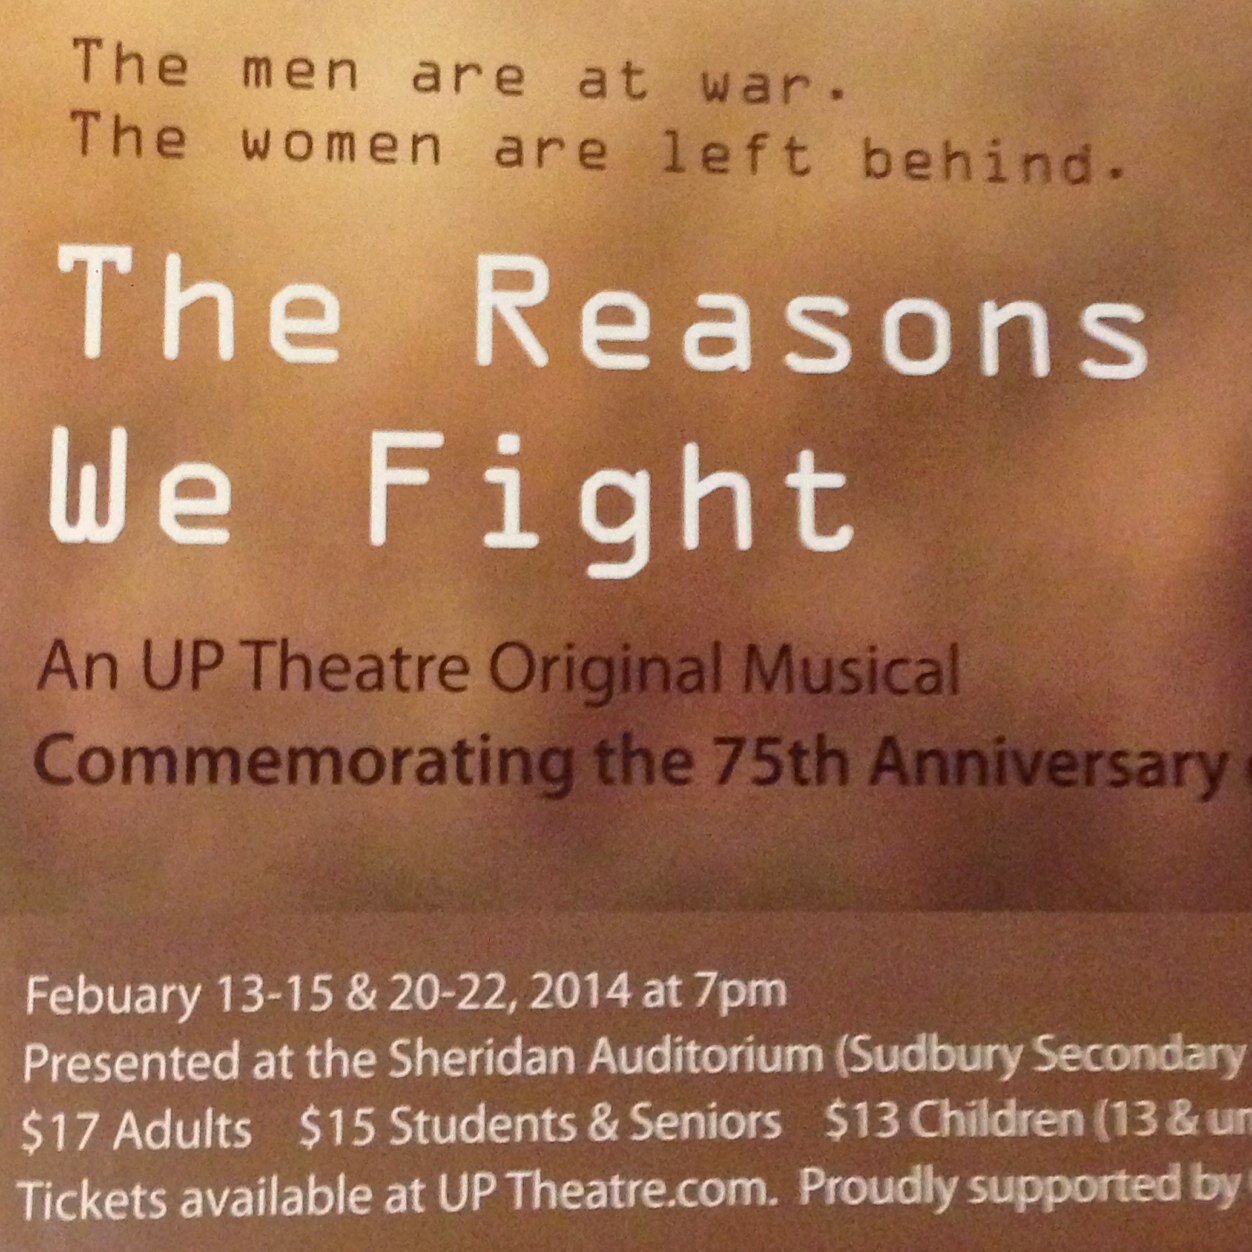 Providing the opportunity for youth in the community to grow and learn about Theatre, while giving back to local charities! The Reasons We Fight plays Feb 13-22